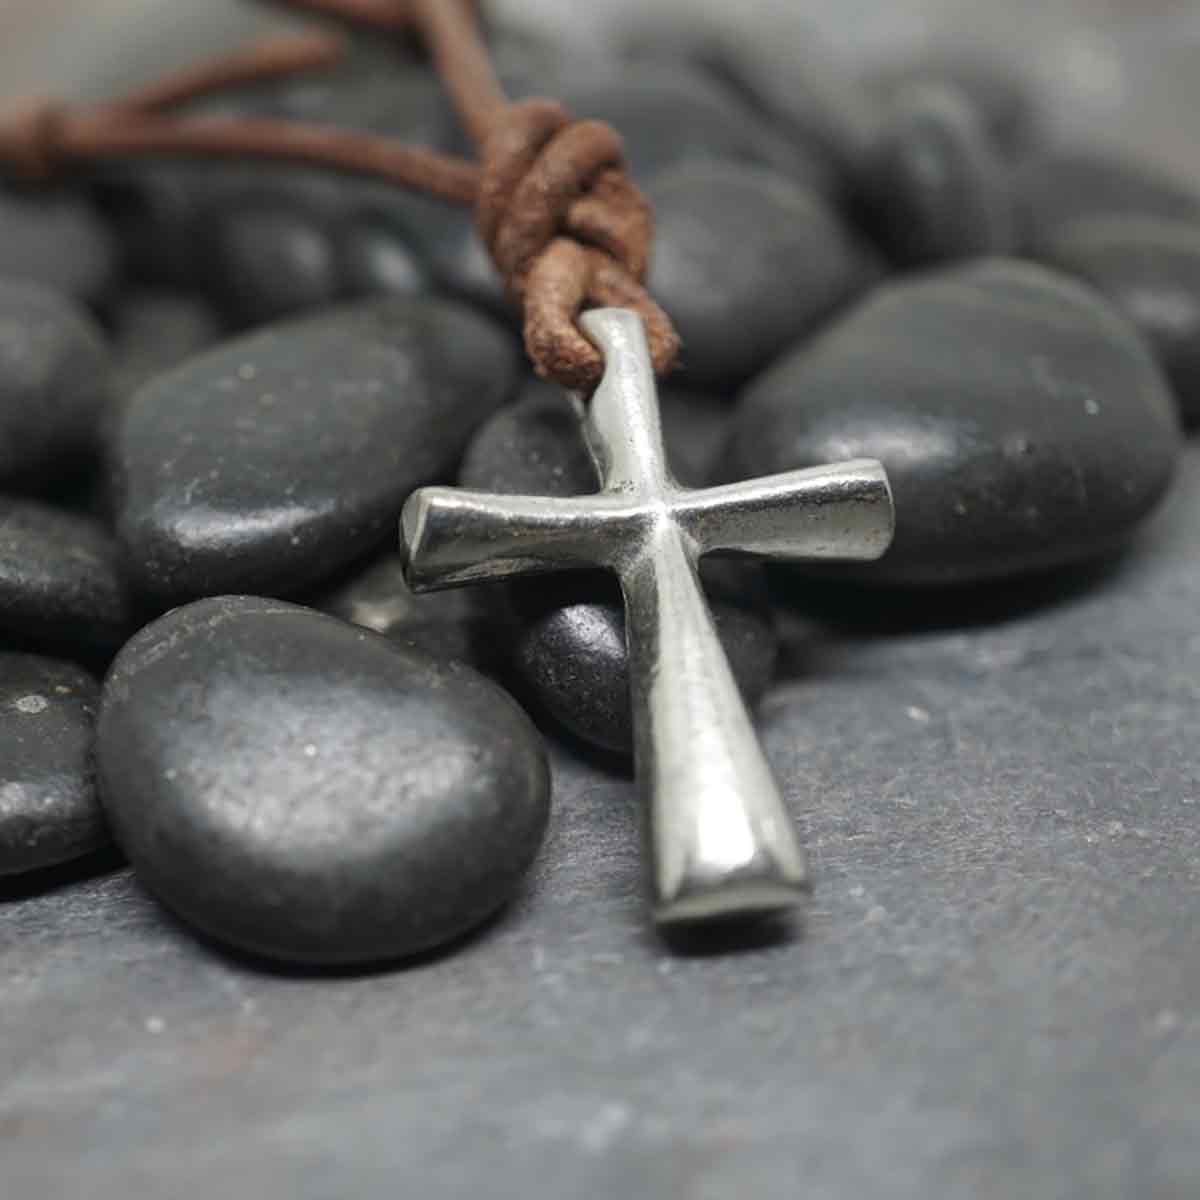 Mens Pewter Cross Leather Cord Necklace – Sol Creations